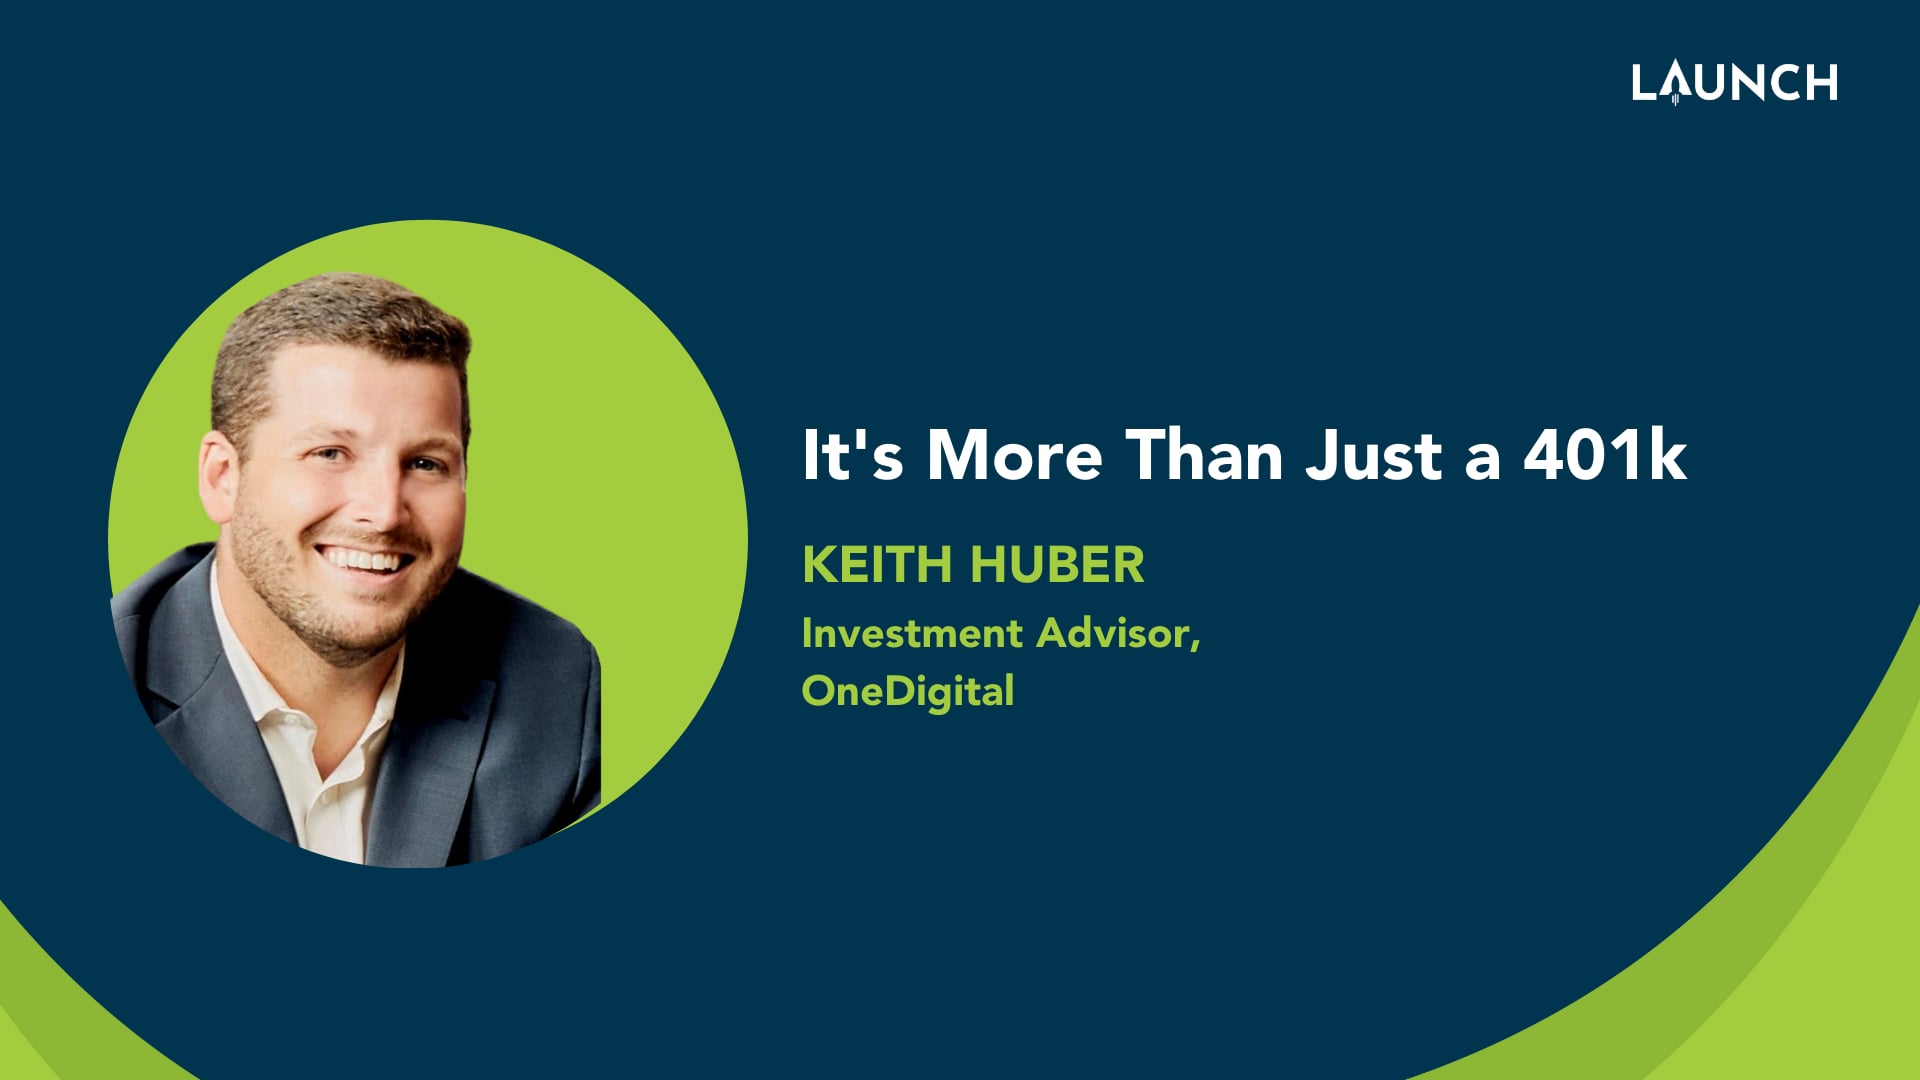 It's More Than Just a 401k - Keith Huber